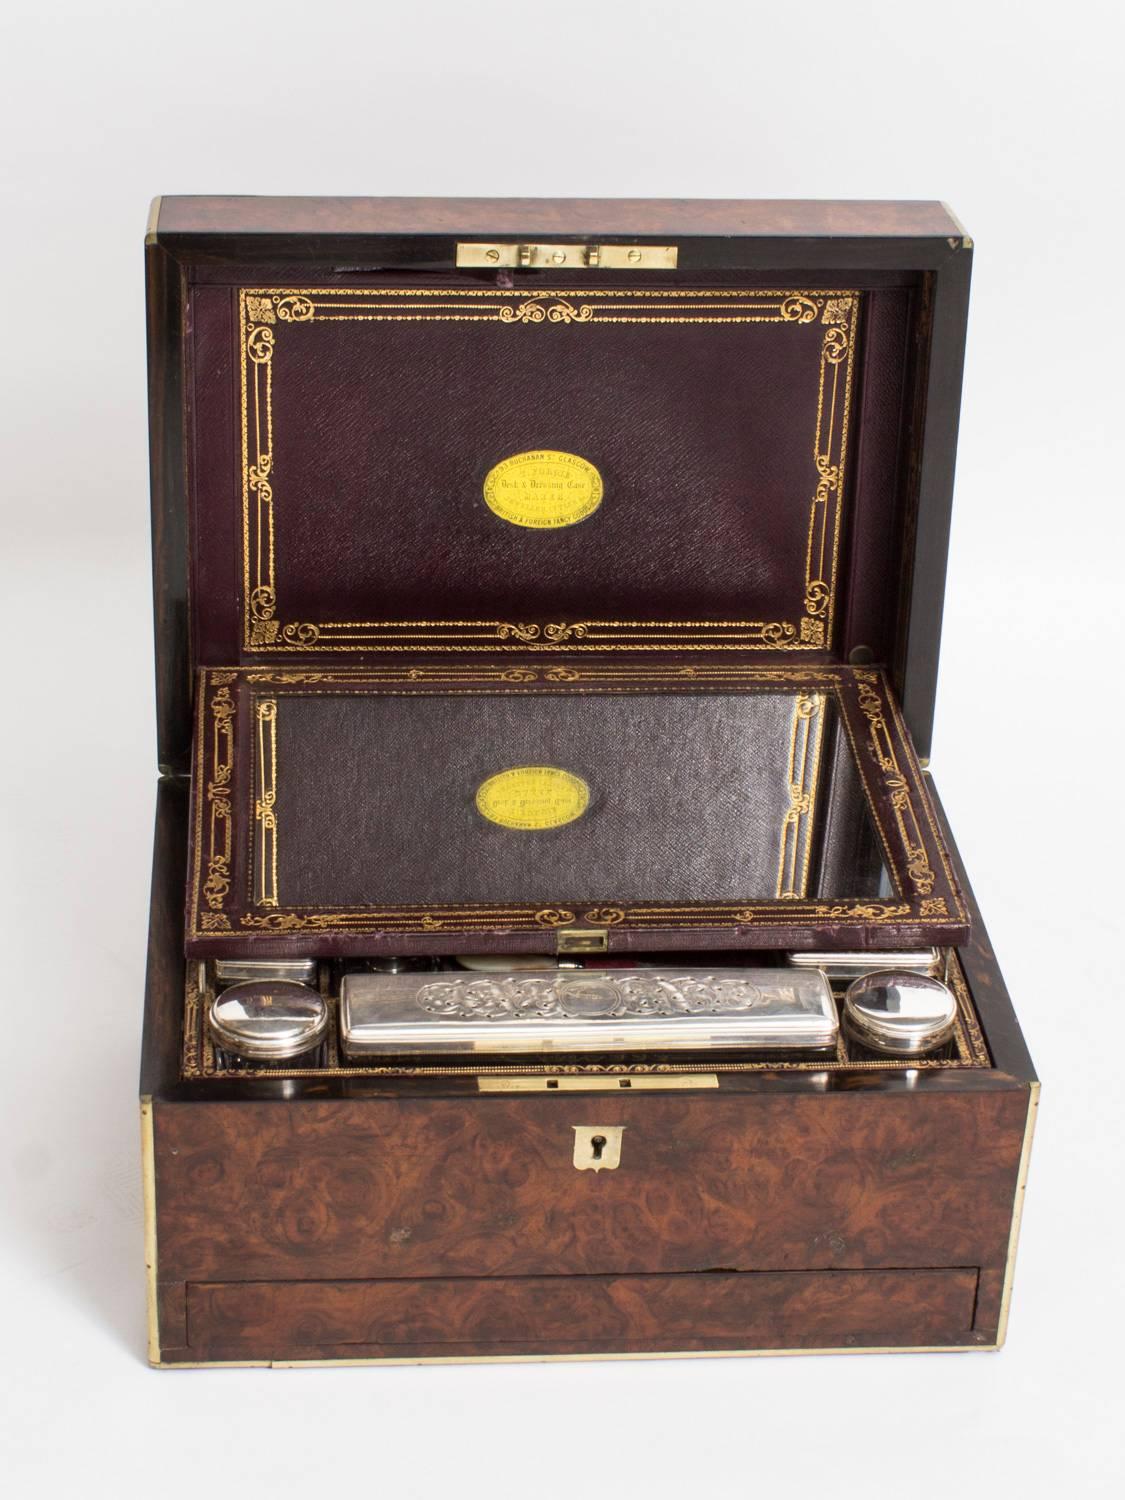 This is a stunning antique Victorian burr walnut and ormolu-mounted rectangular lady's travelling case, retailed by T. Forgie: 93 Buchman St, Glasgow, Scotland, circa 1860 in date.

The spectacular burr walnut case is outlined with brass stringing